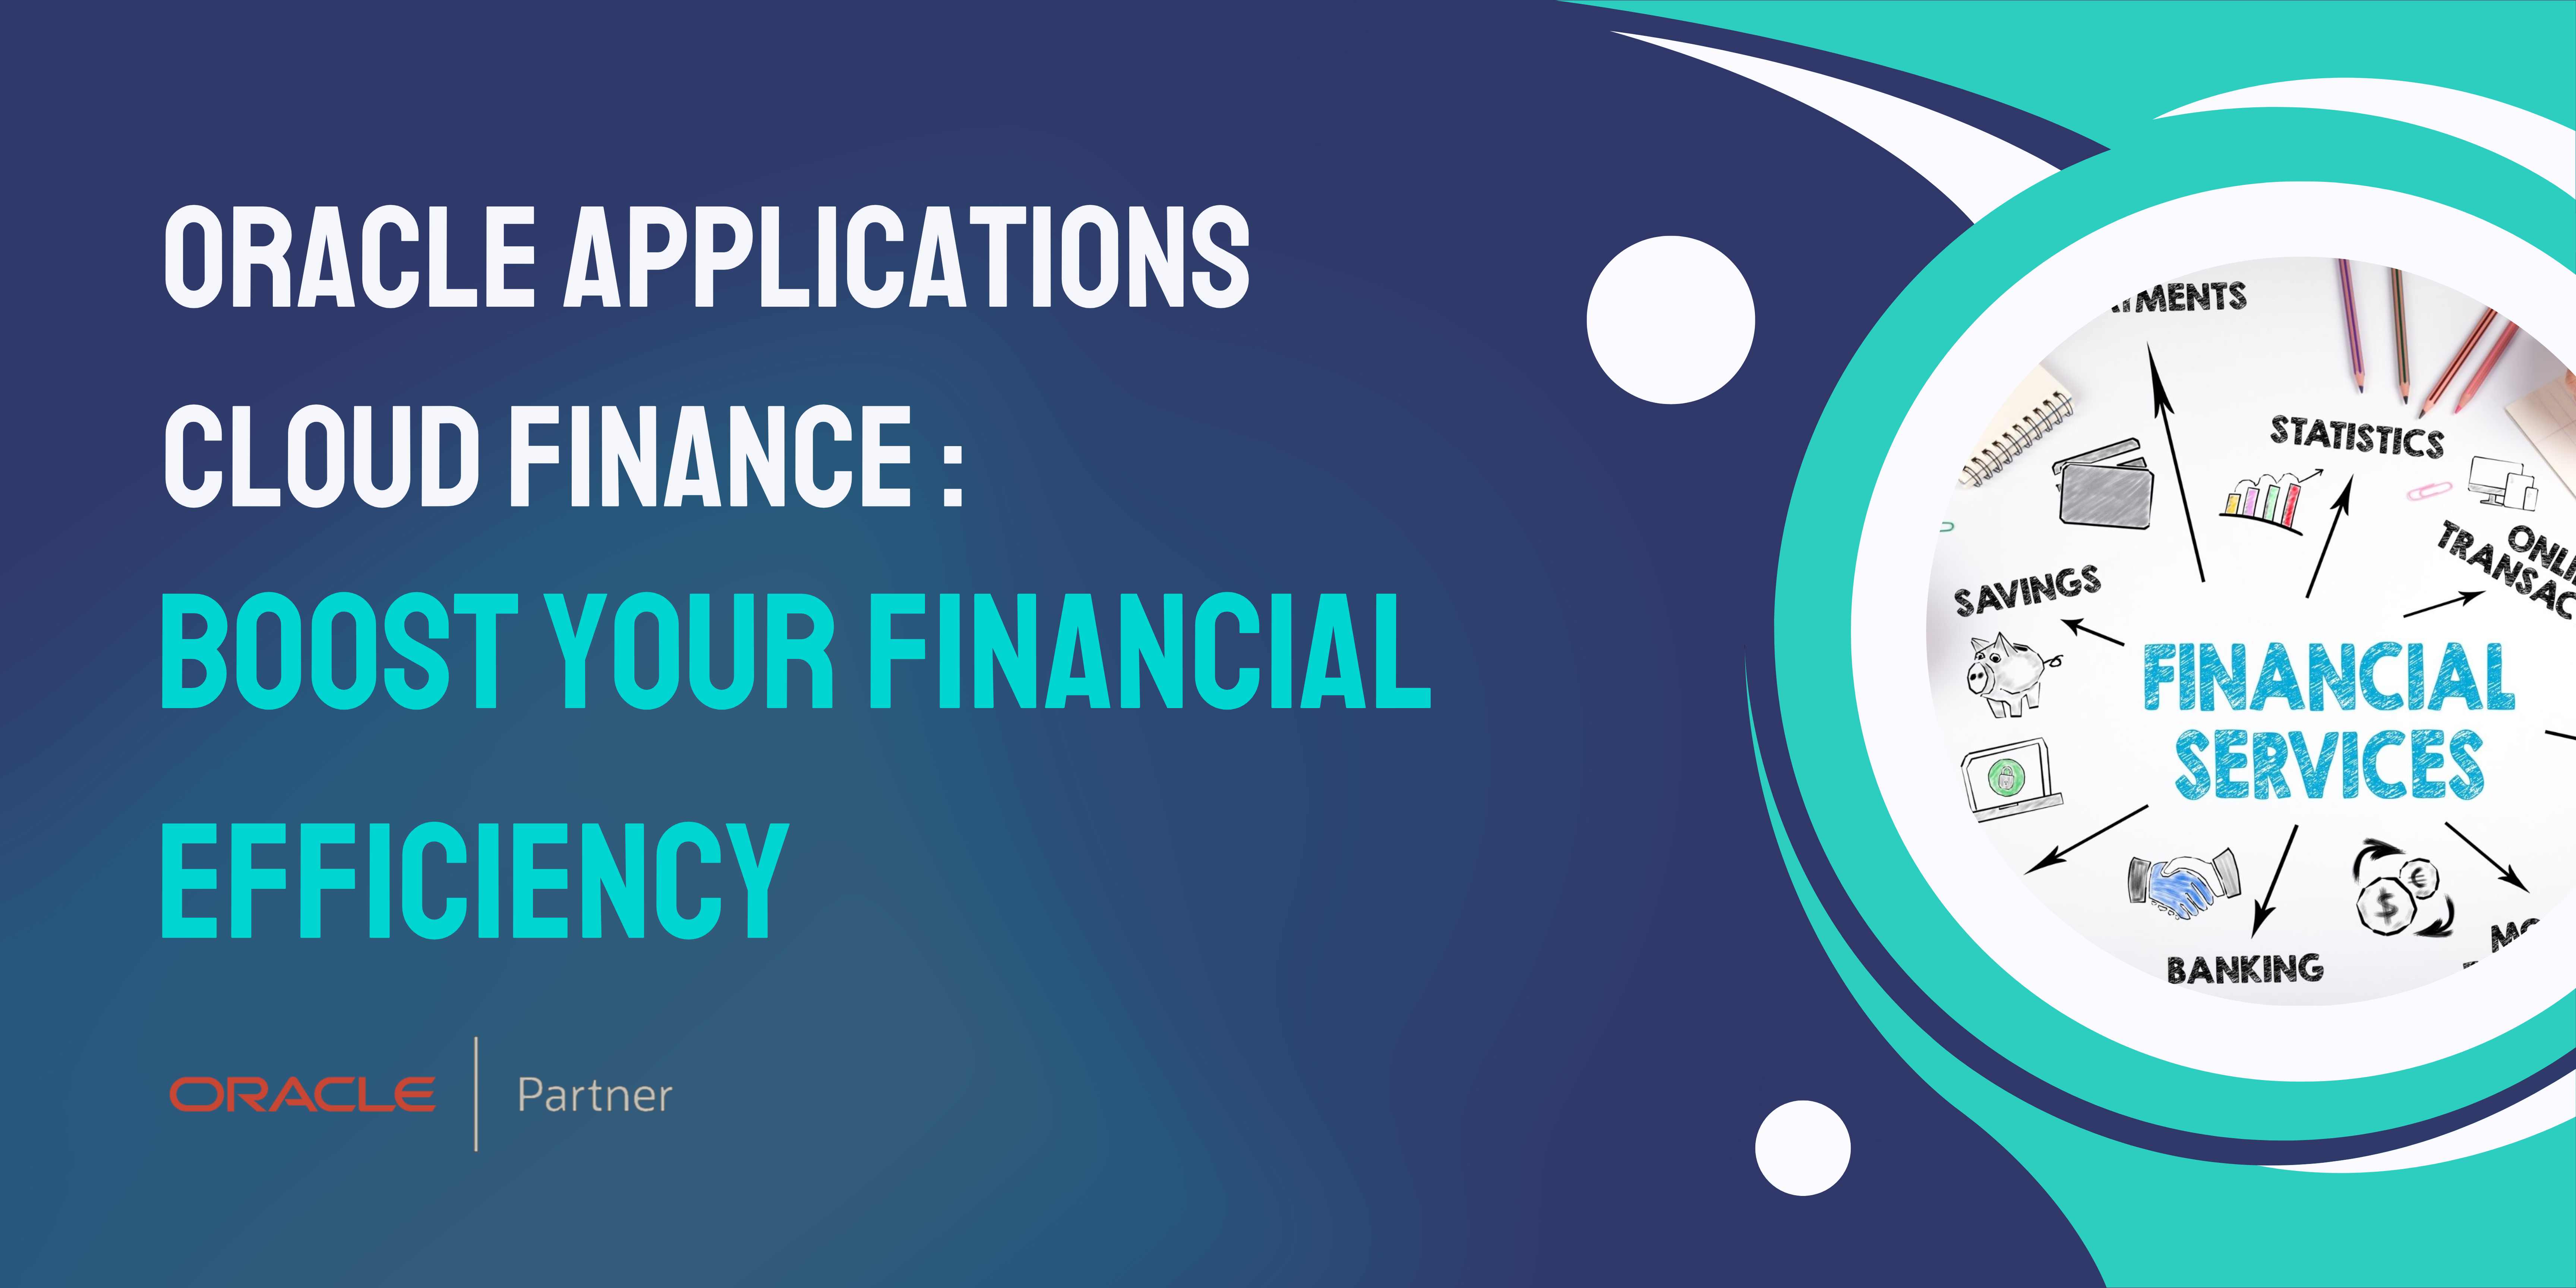 Oracle Applications Cloud Finance